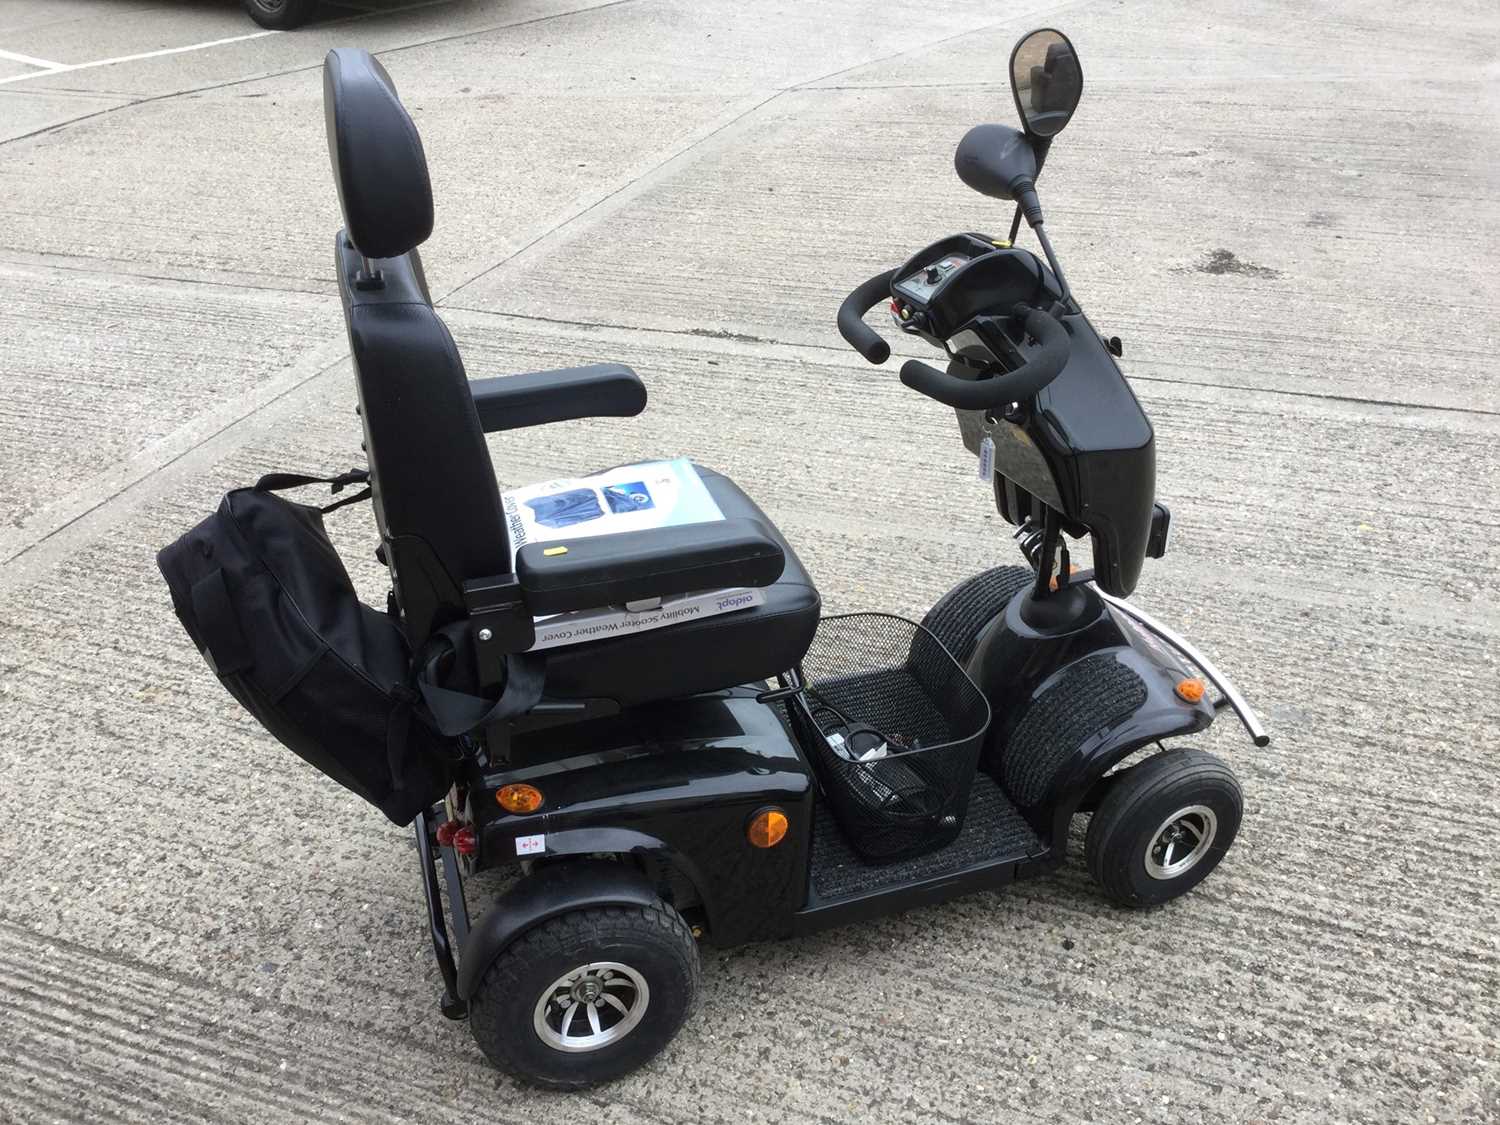 Lot 4 - Mayfair 8 Deluxe Freerider Mobility scooter with charger and key